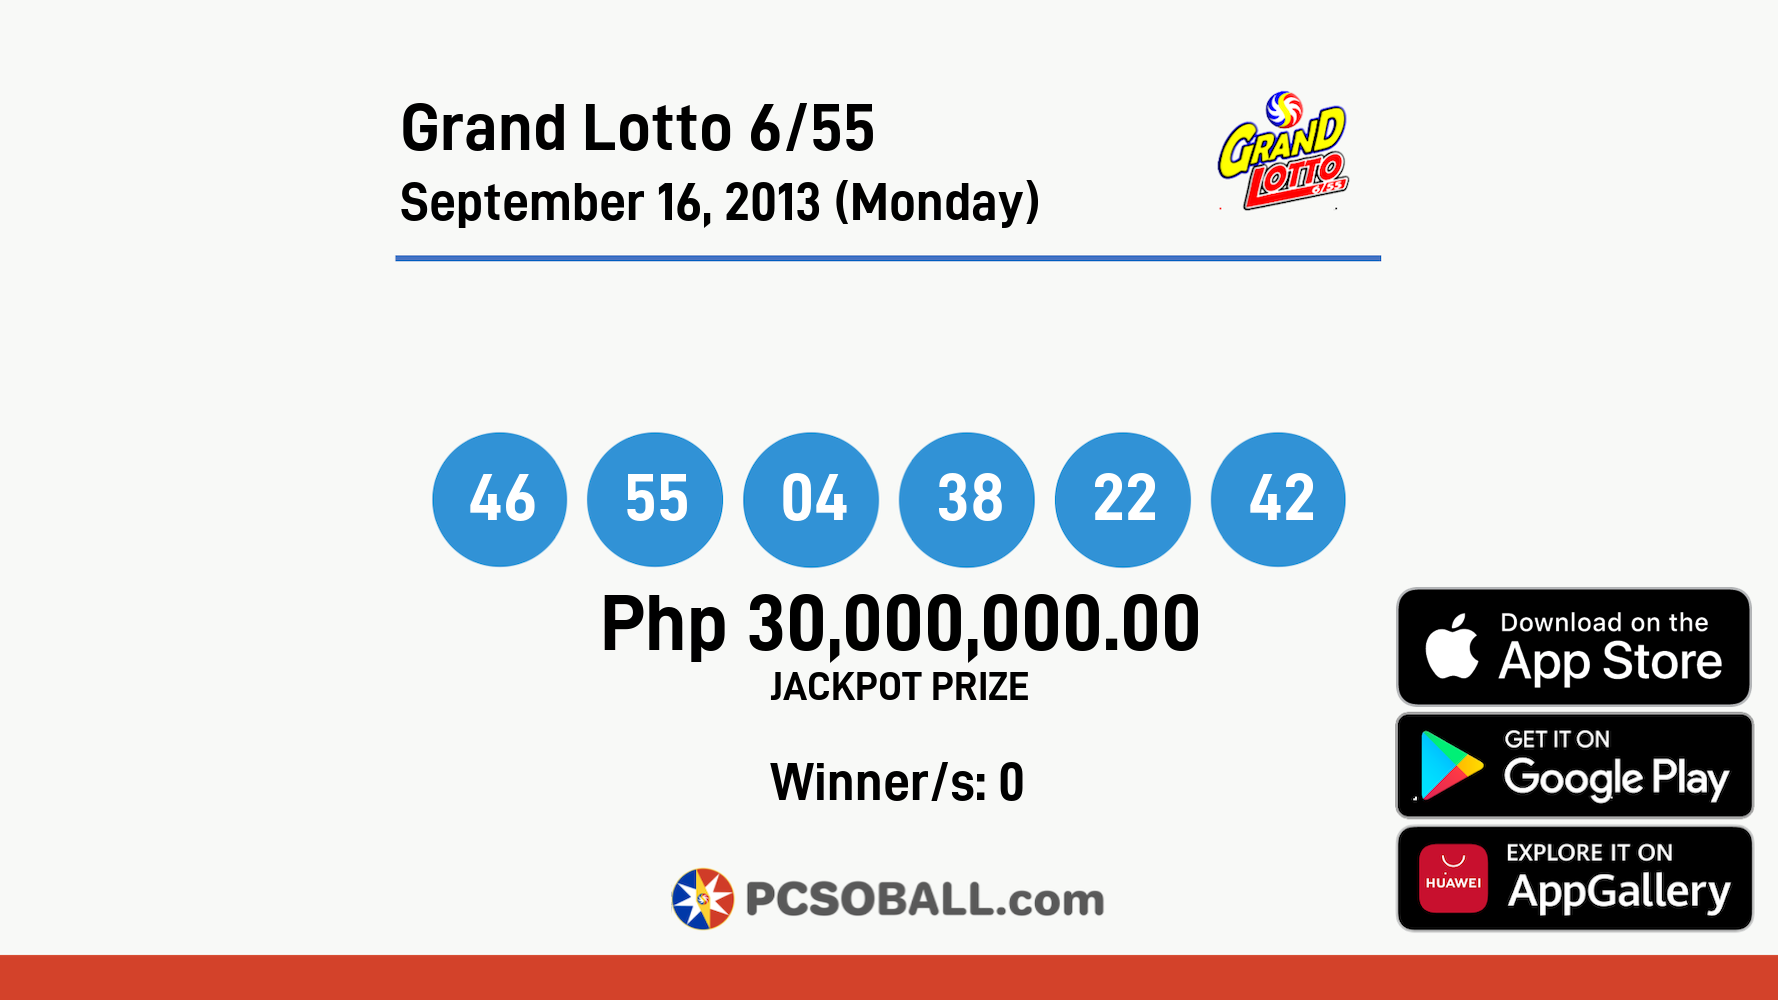 Grand Lotto 6/55 September 16, 2013 (Monday) Result